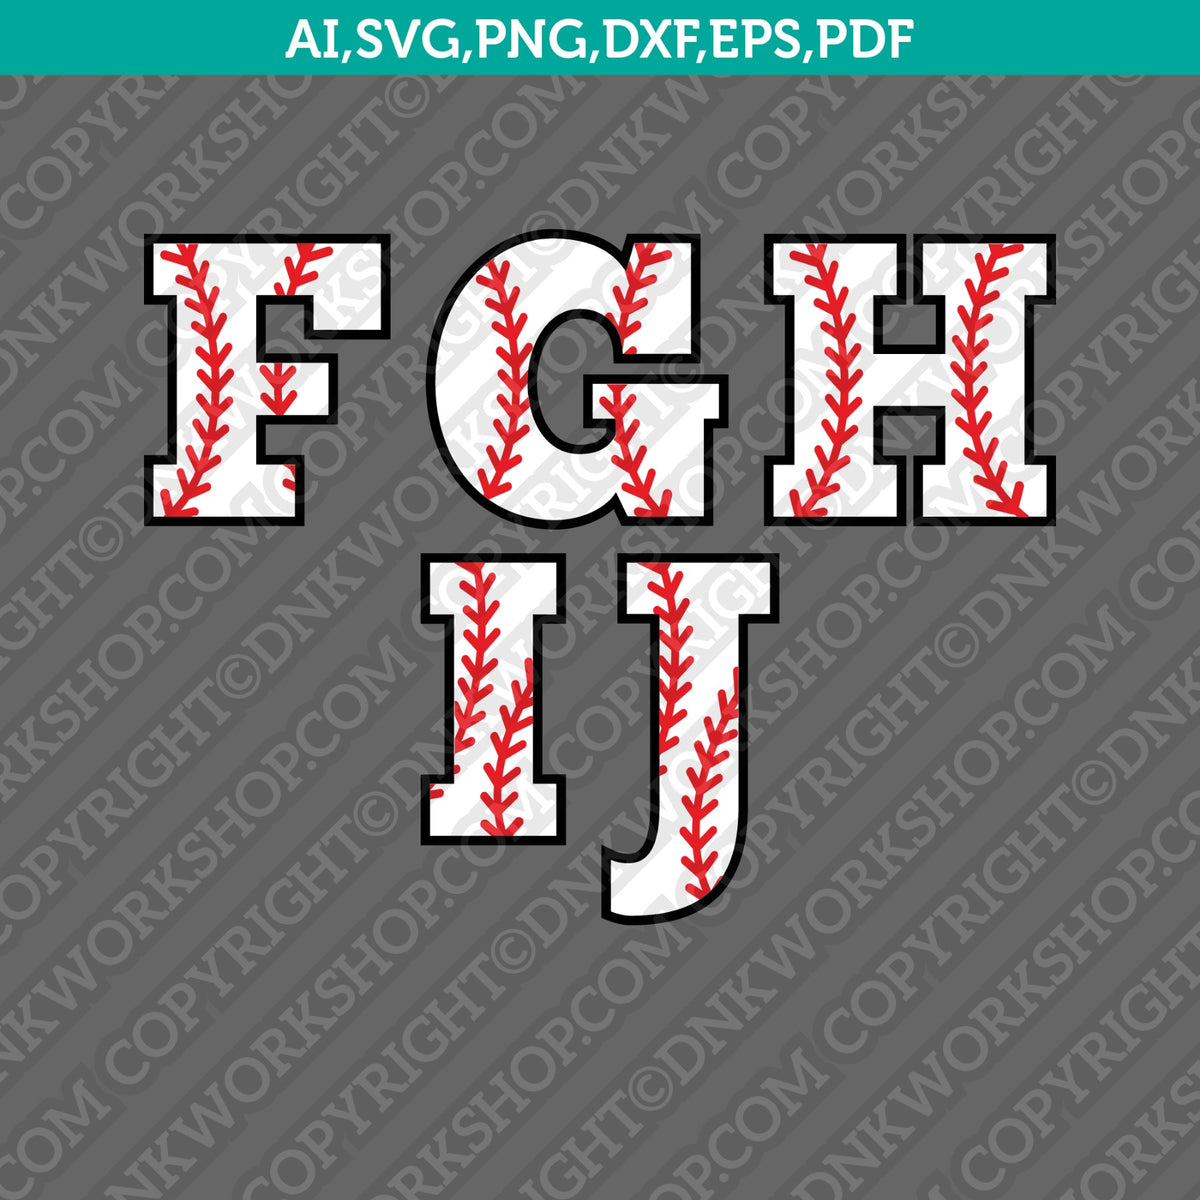 Baseball font SVG cut files  Baseball letters and numbers